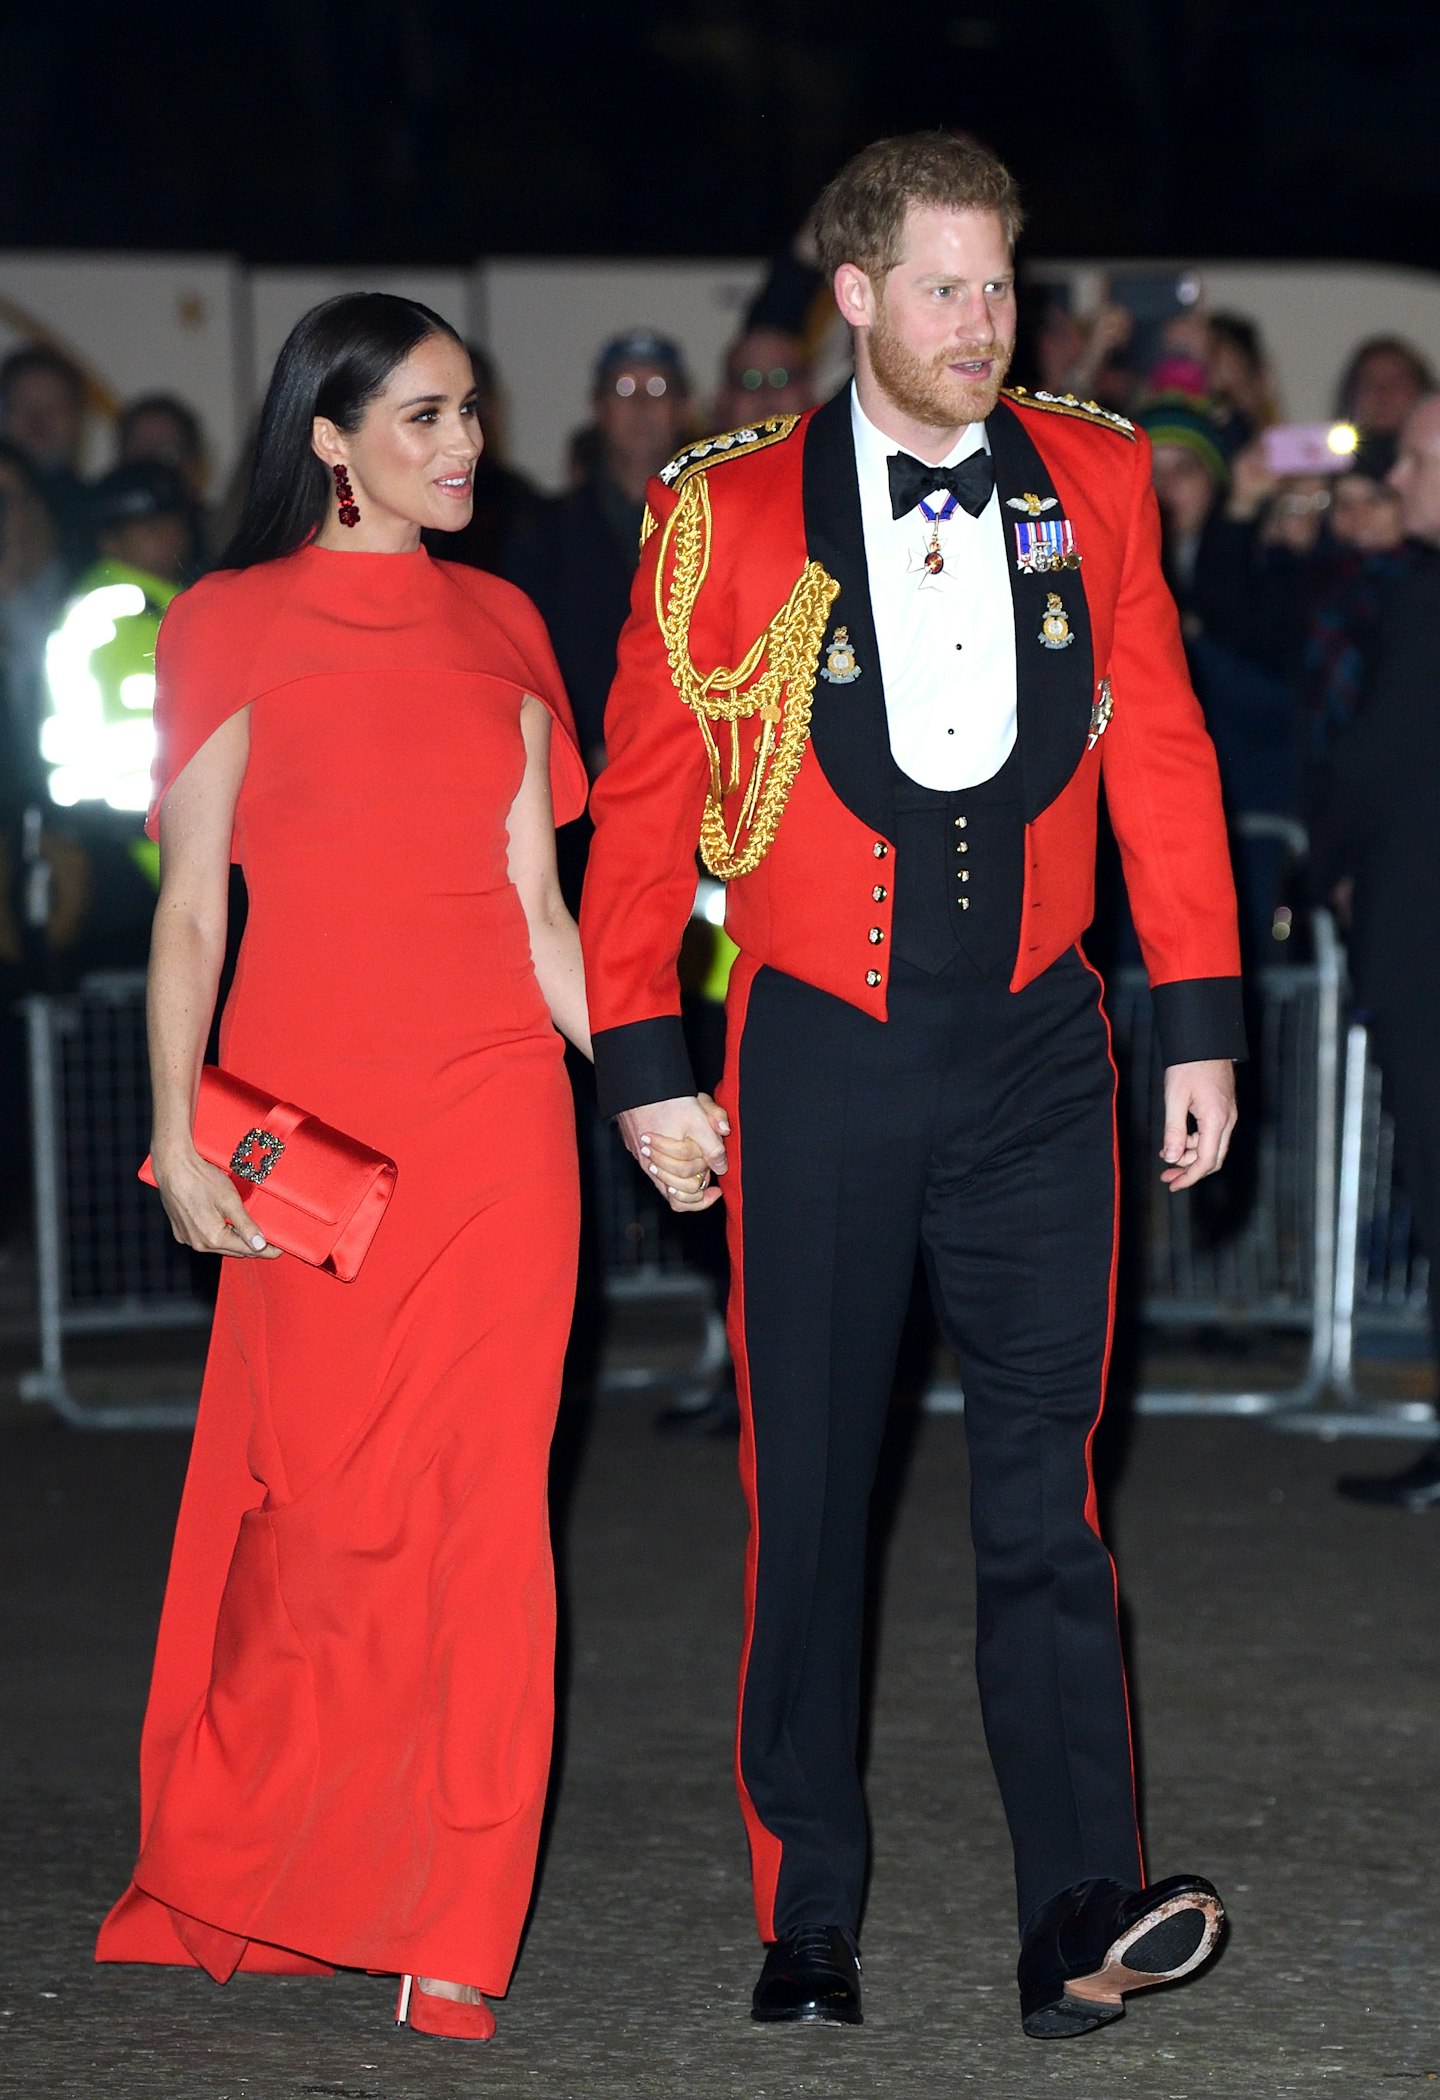 Meghan Markle and Prince Harry all in red